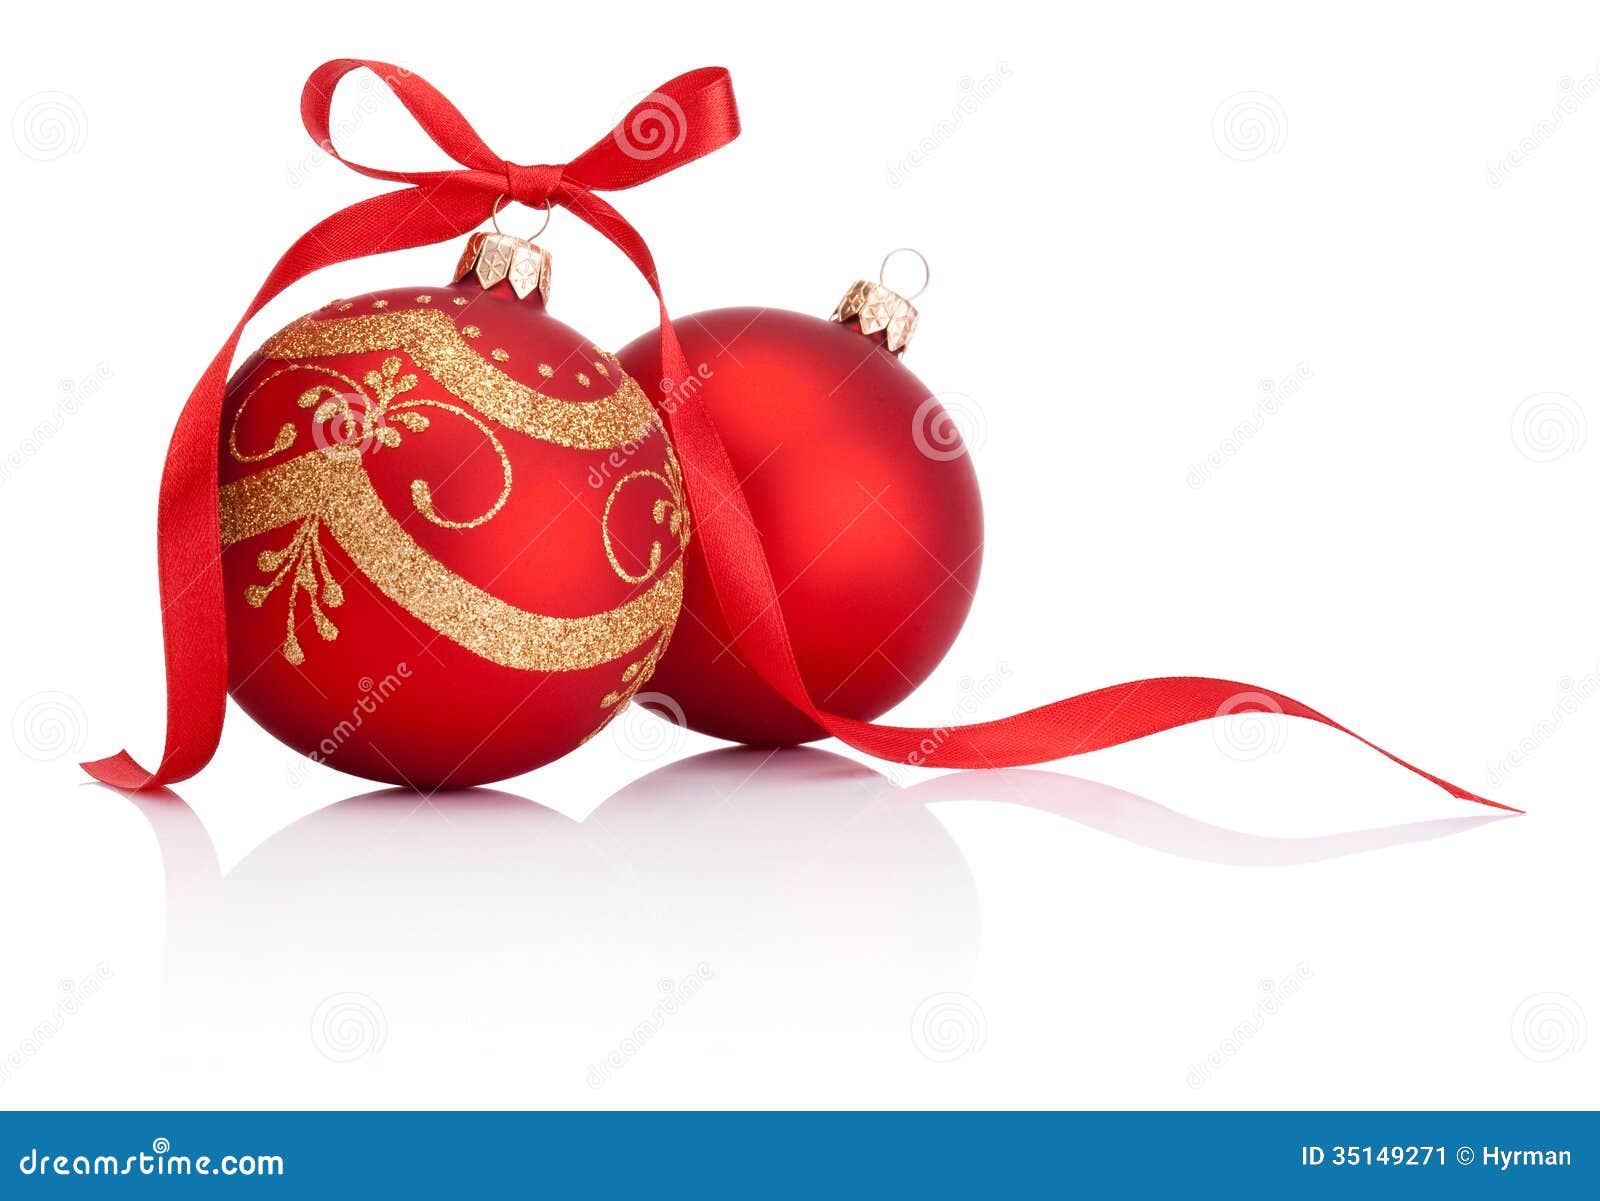 Two Red Christmas Decoration Balls With Ribbon Bow Stock Image - Image ...